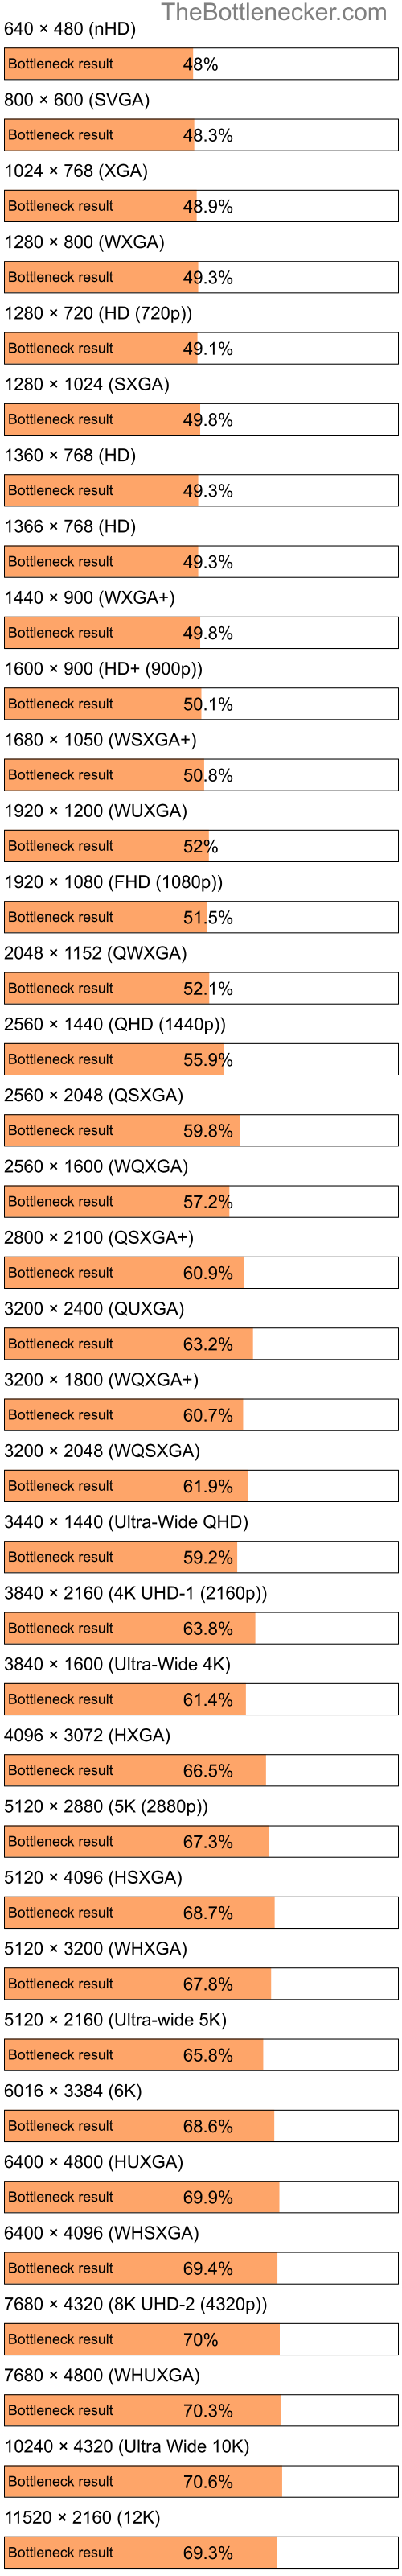 Bottleneck results by resolution for Intel Pentium 4 and AMD Radeon 3000 in Processor Intense Tasks